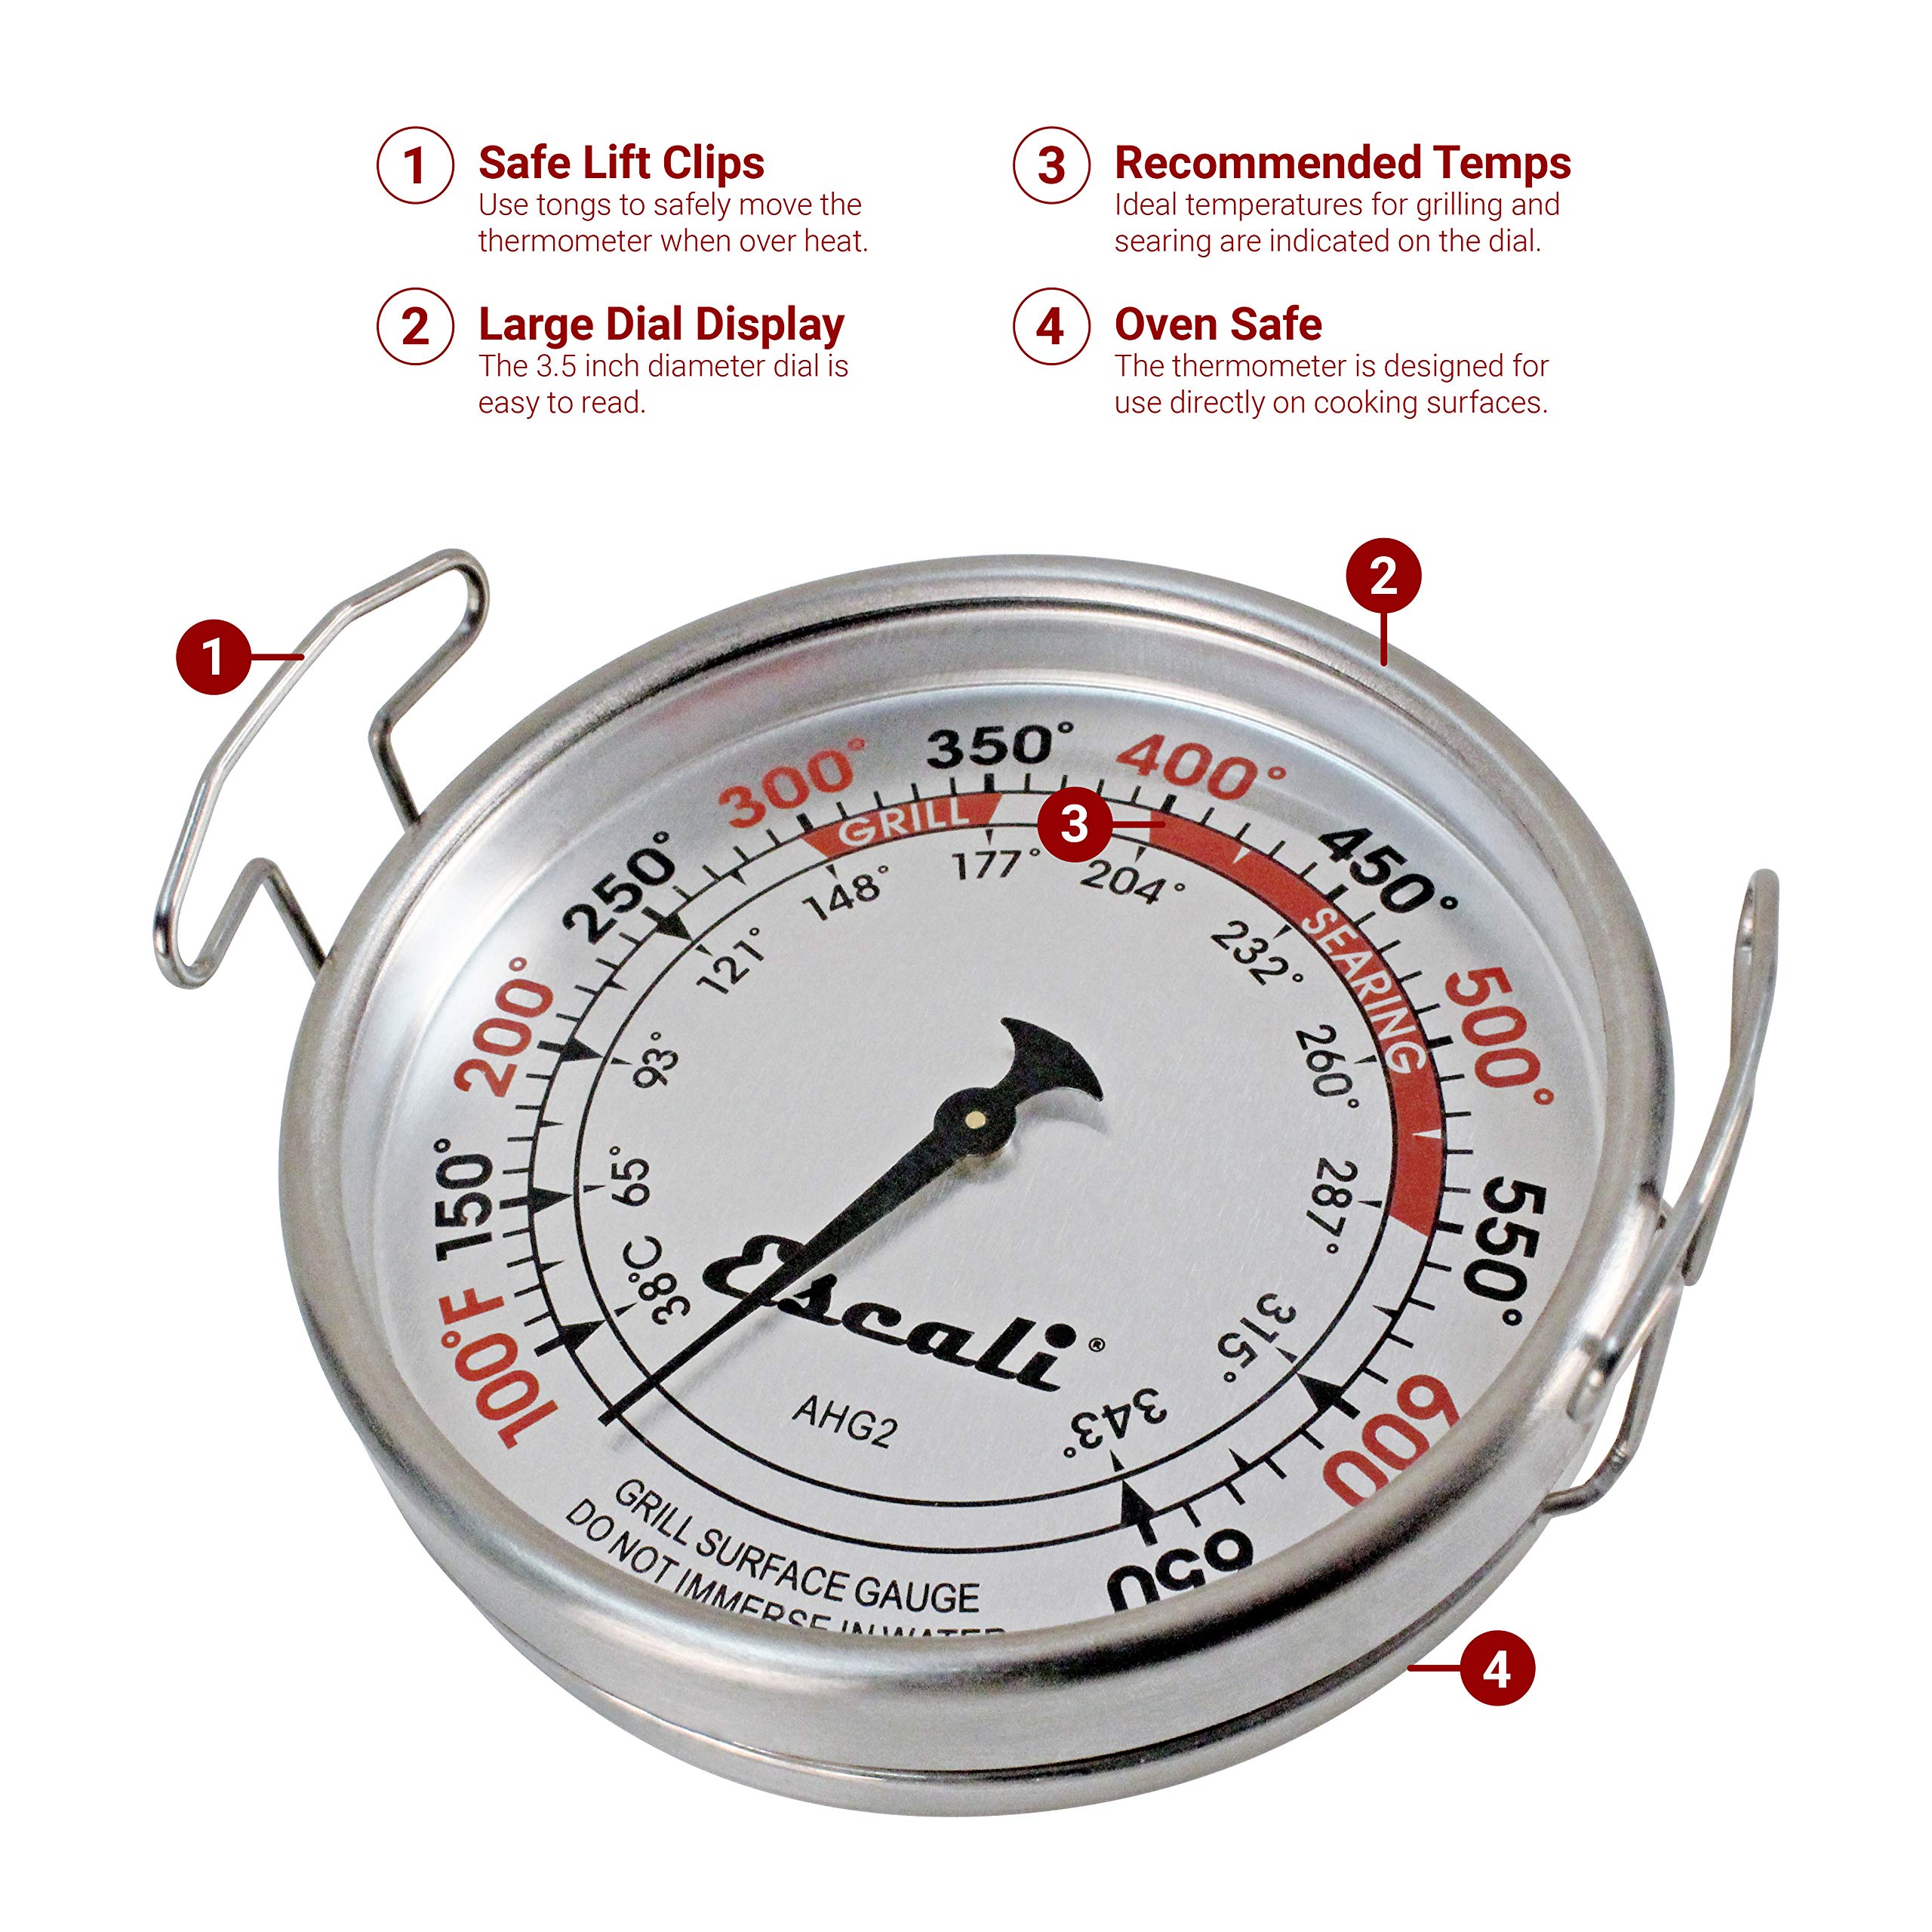 Escali AHG2 Stainless Steel Direct Grill Surface Thermometer, Searing Temperature Zones 100-500F Degree Range NSF Certified